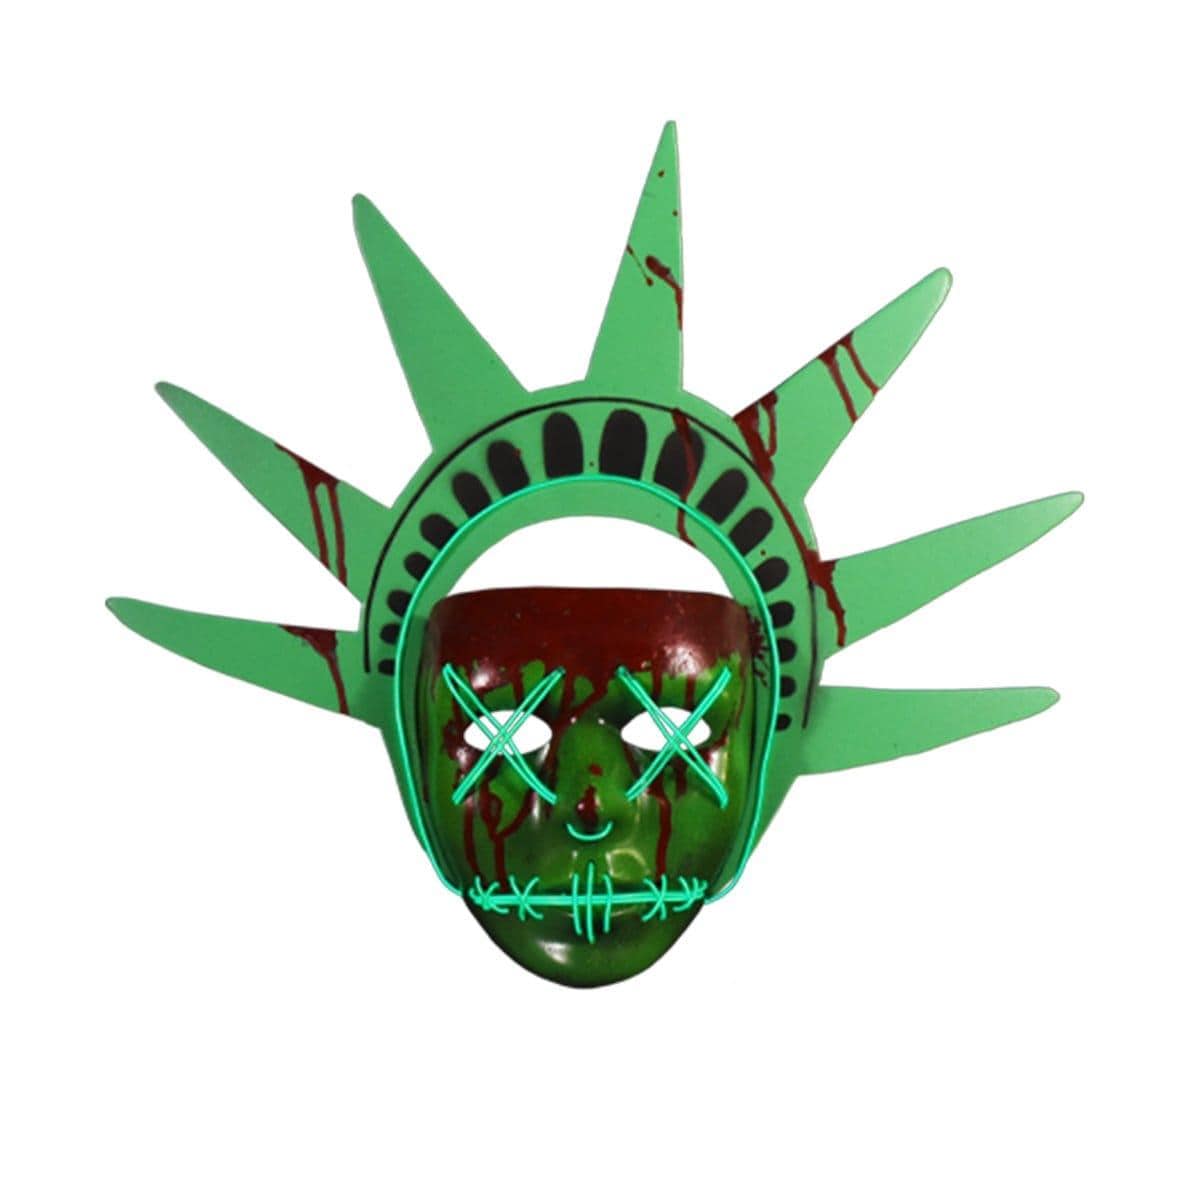 Buy Costume Accessories Lady Liberty mask, The Purge sold at Party Expert